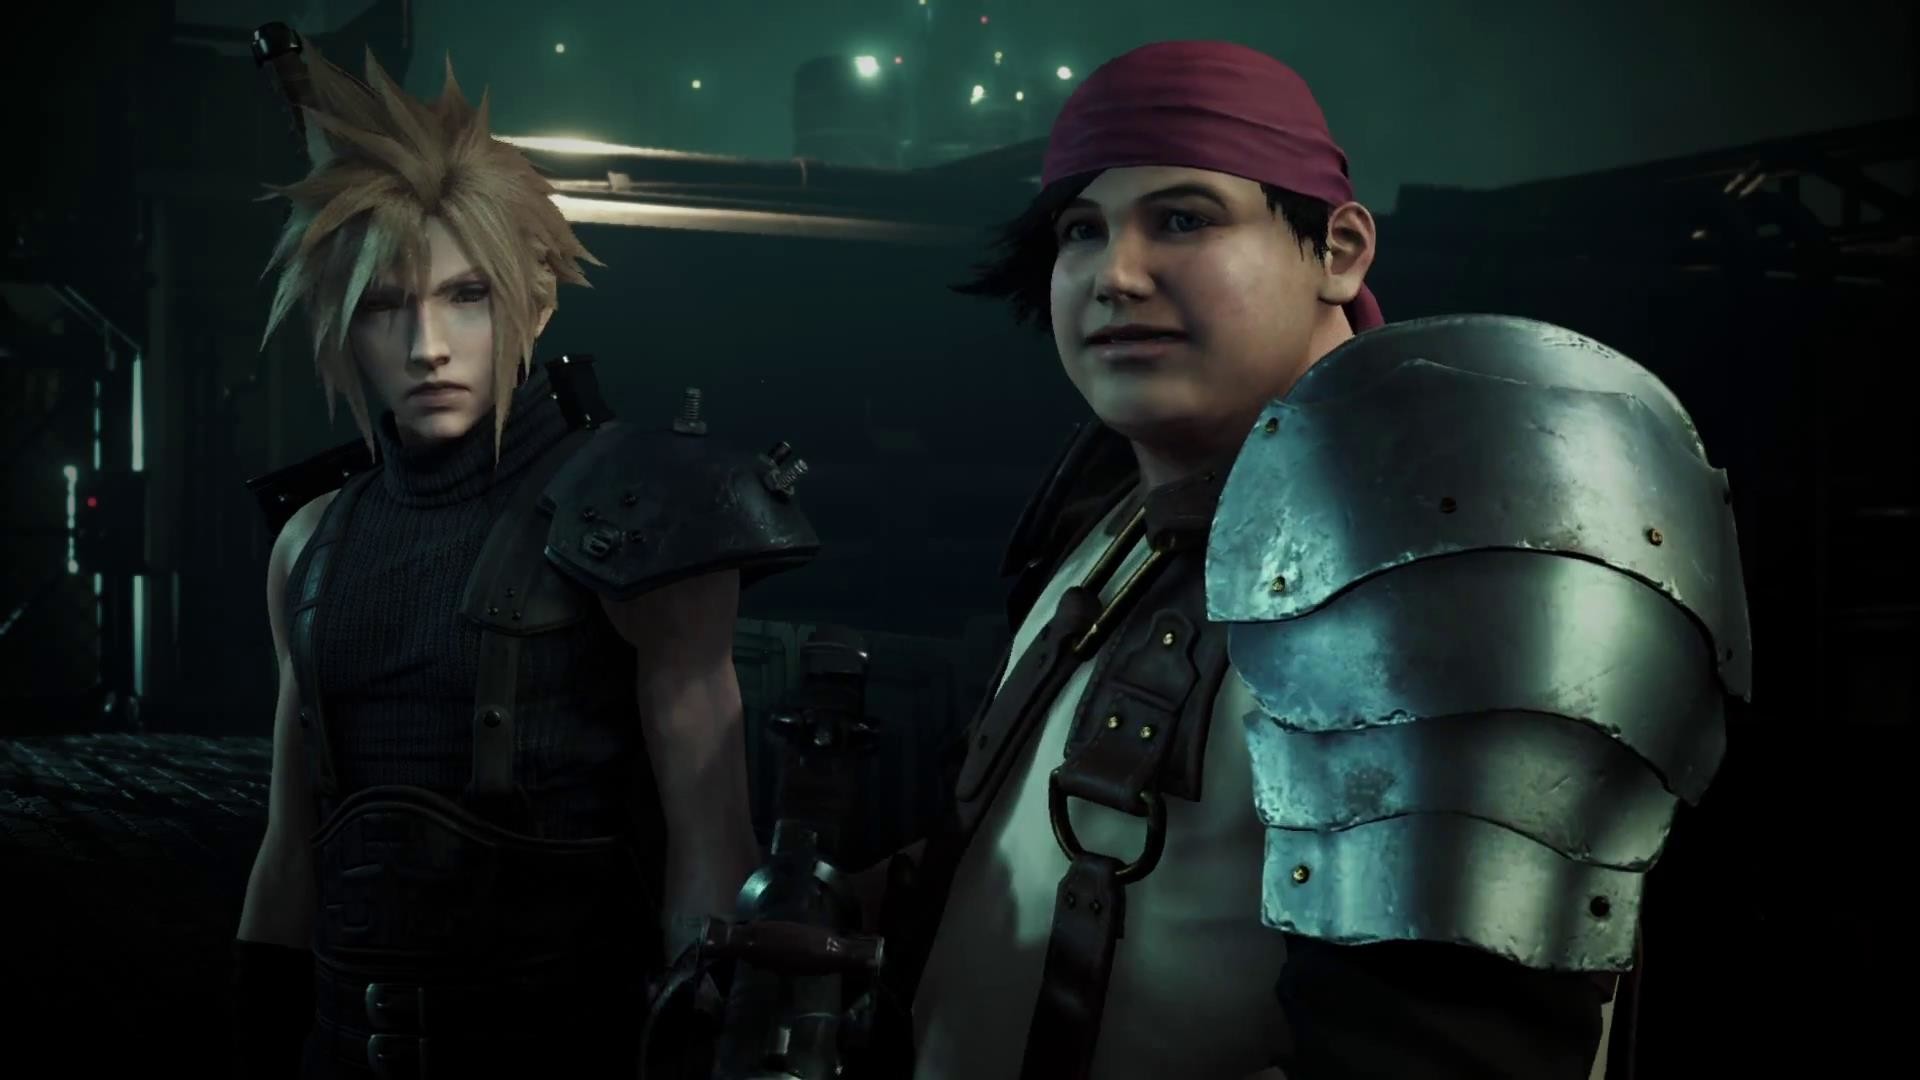 1920x1080 Square Enix wants to explore Biggs, Wedge, and Jessie more in FF7 Remake